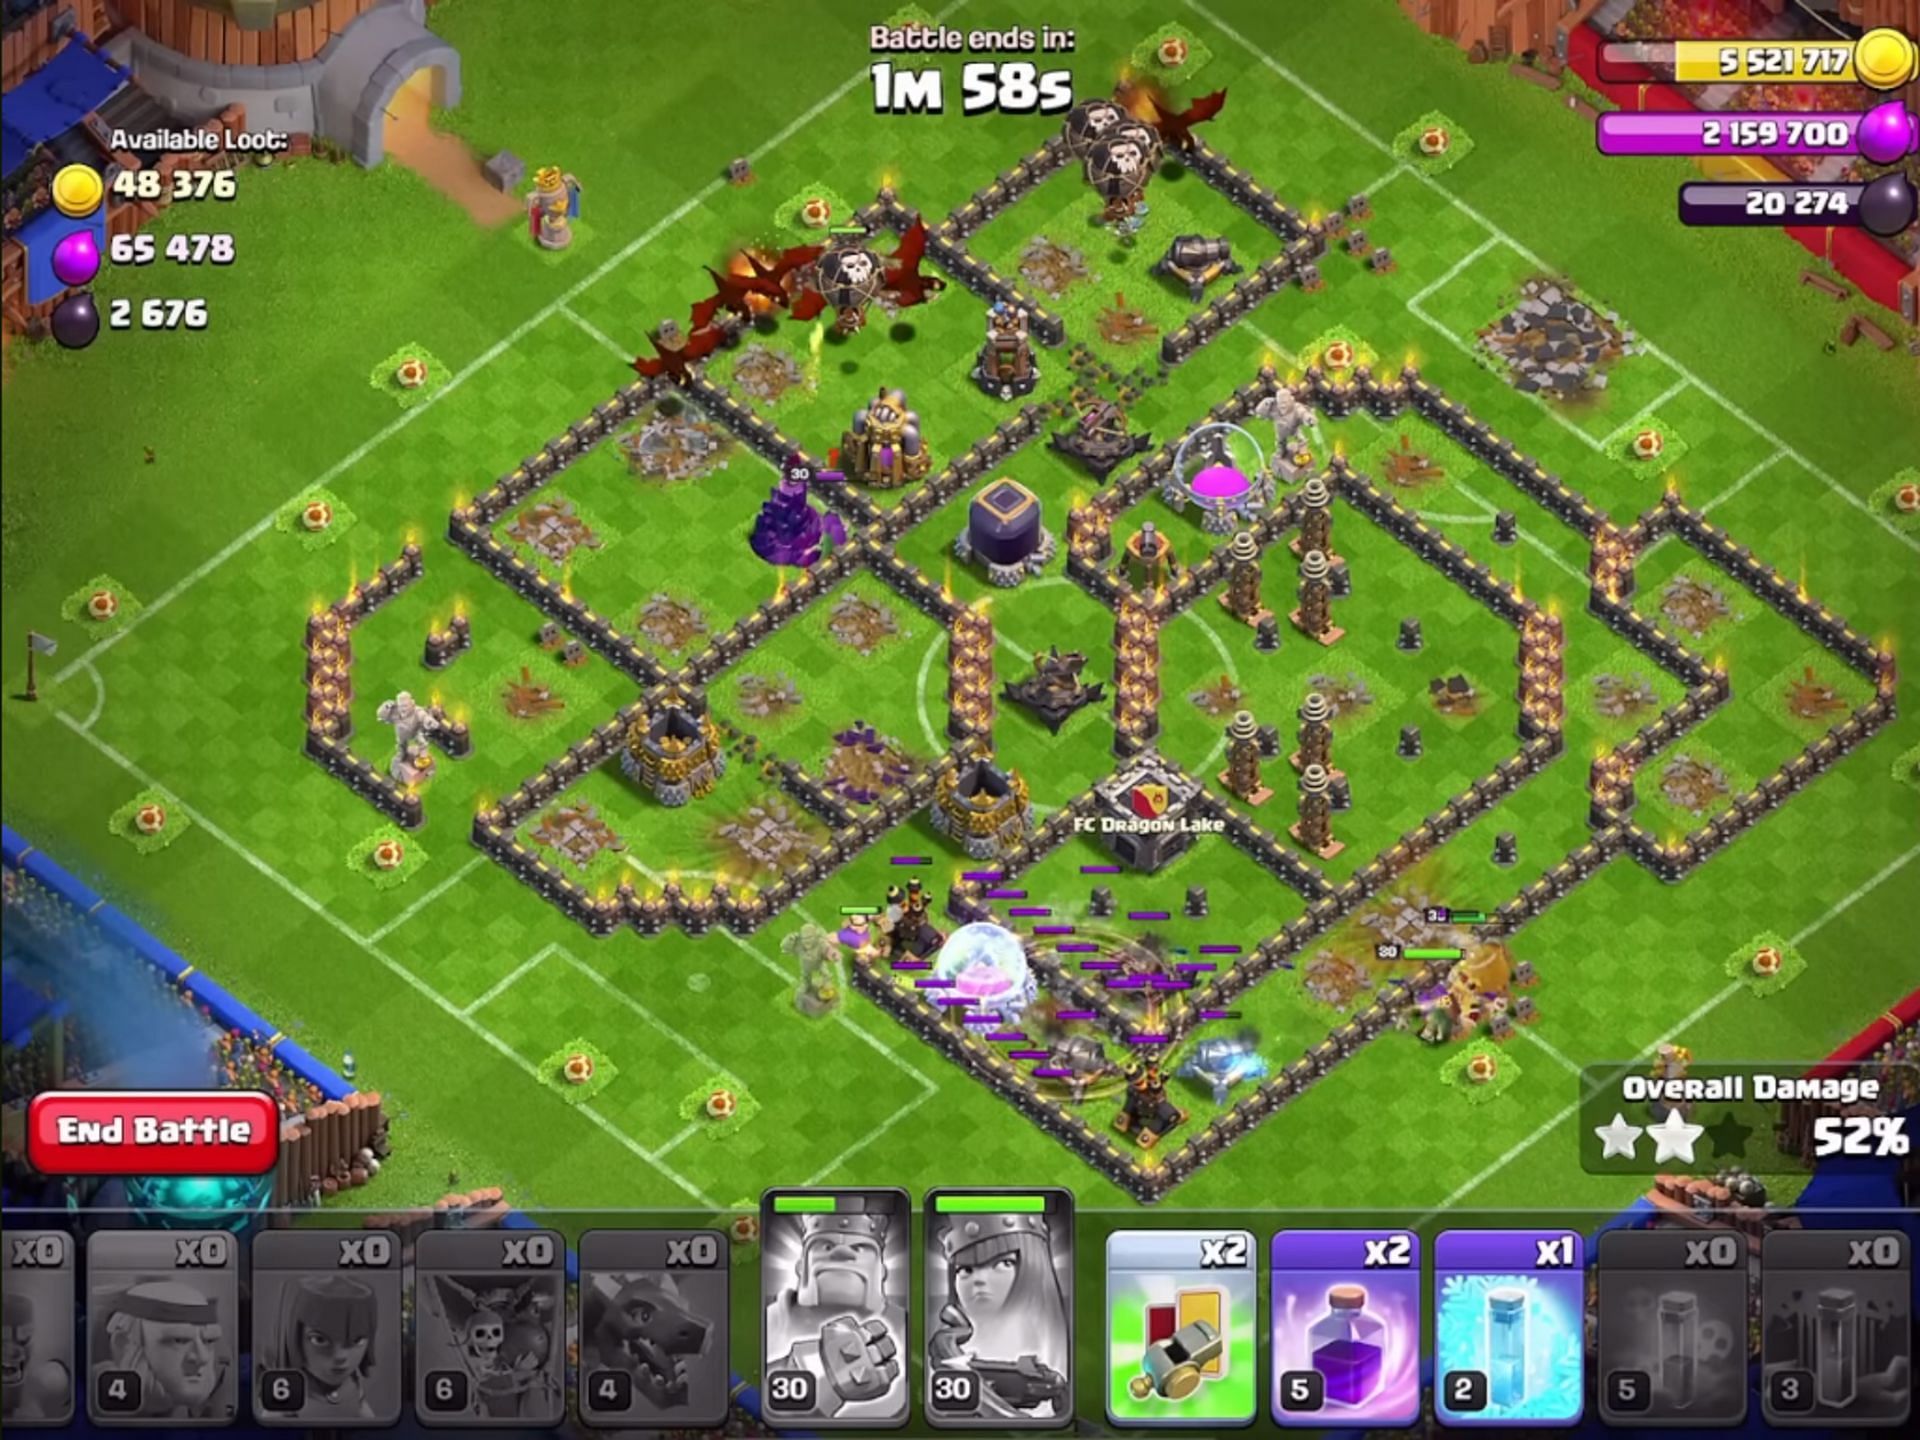 Balloons and Dragons destroying the base (Image via Supercell)